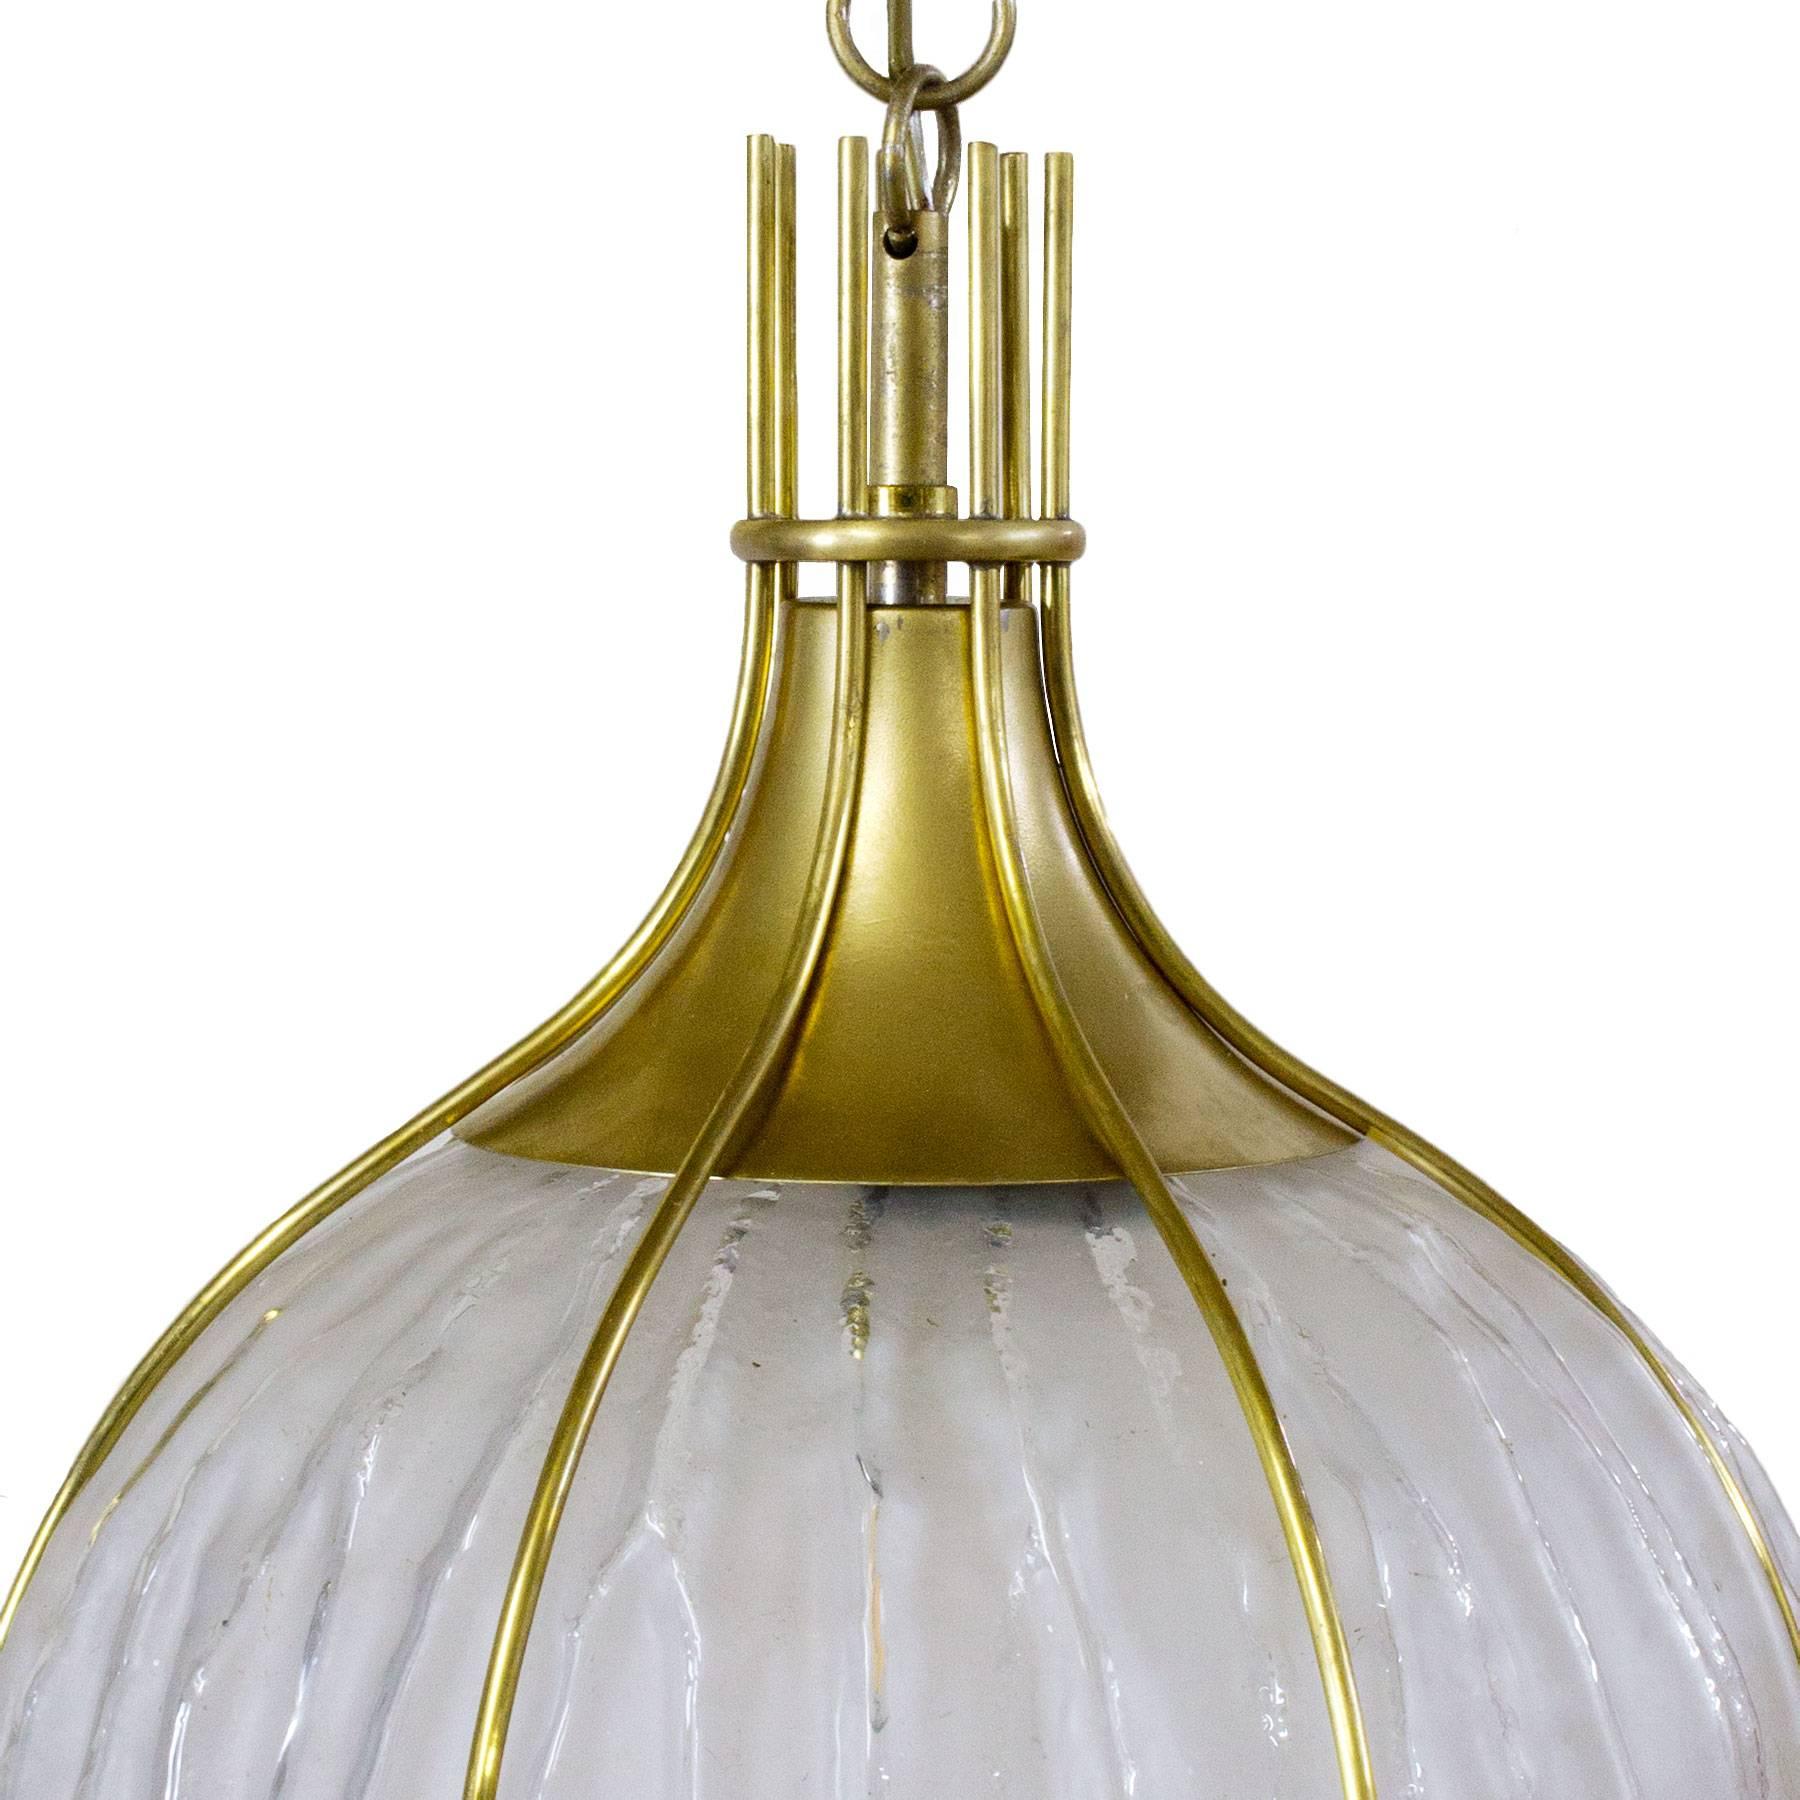  Mid-Century Modern Hanging Lantern by Esperia, Moulded Etched Glass - Italy In Good Condition For Sale In Girona, ES